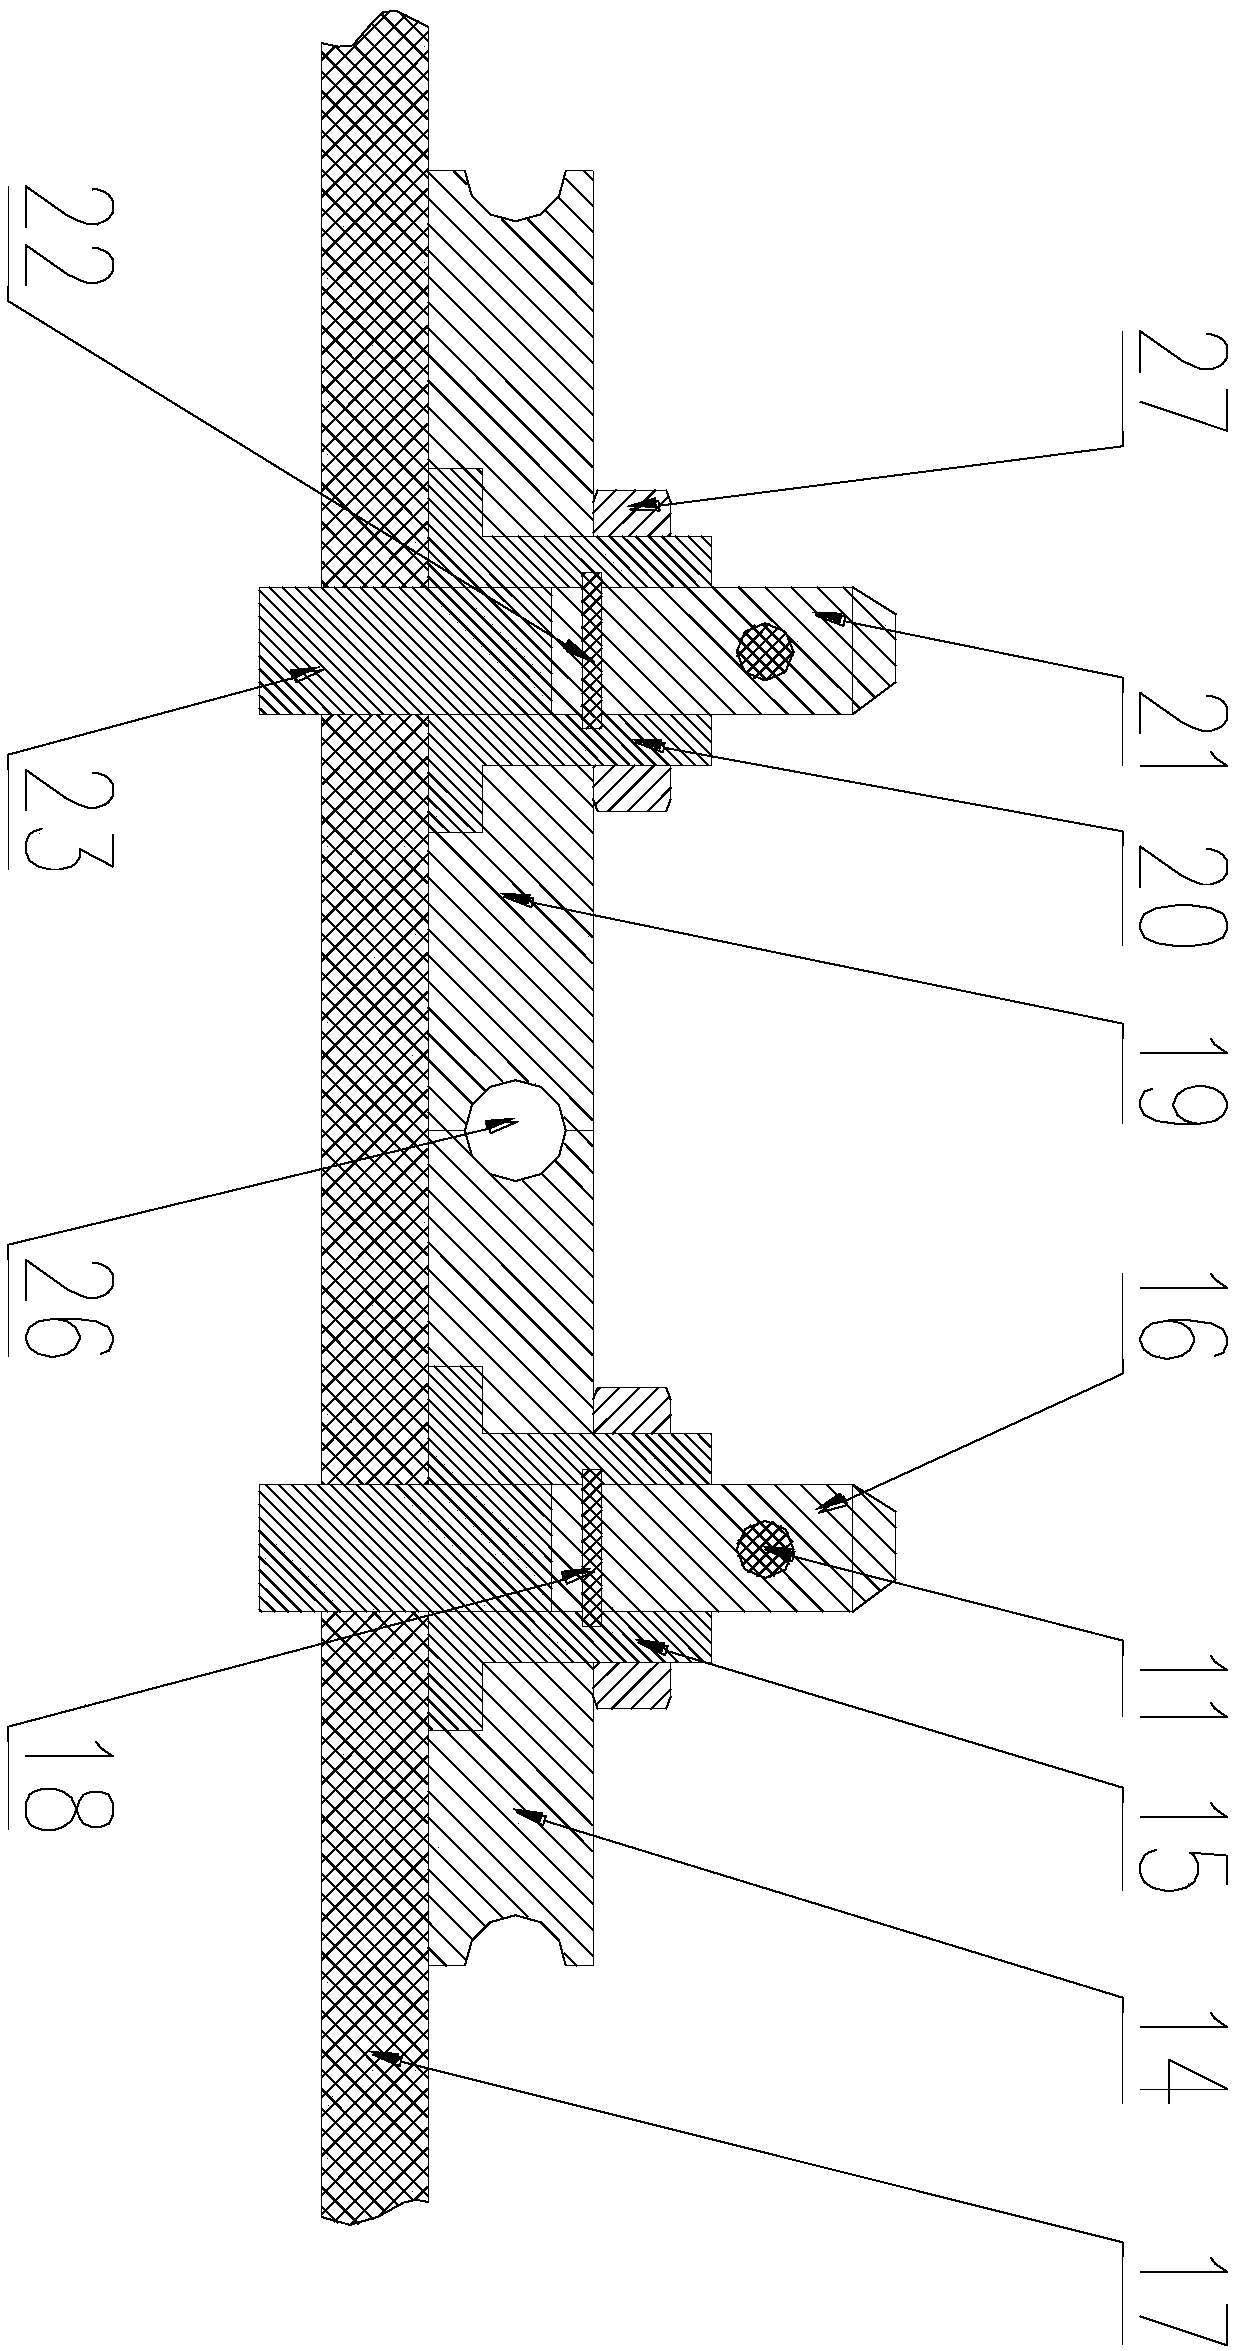 A method for manufacturing a corner-type shield ring for a gas insulate metal-enclosed switch